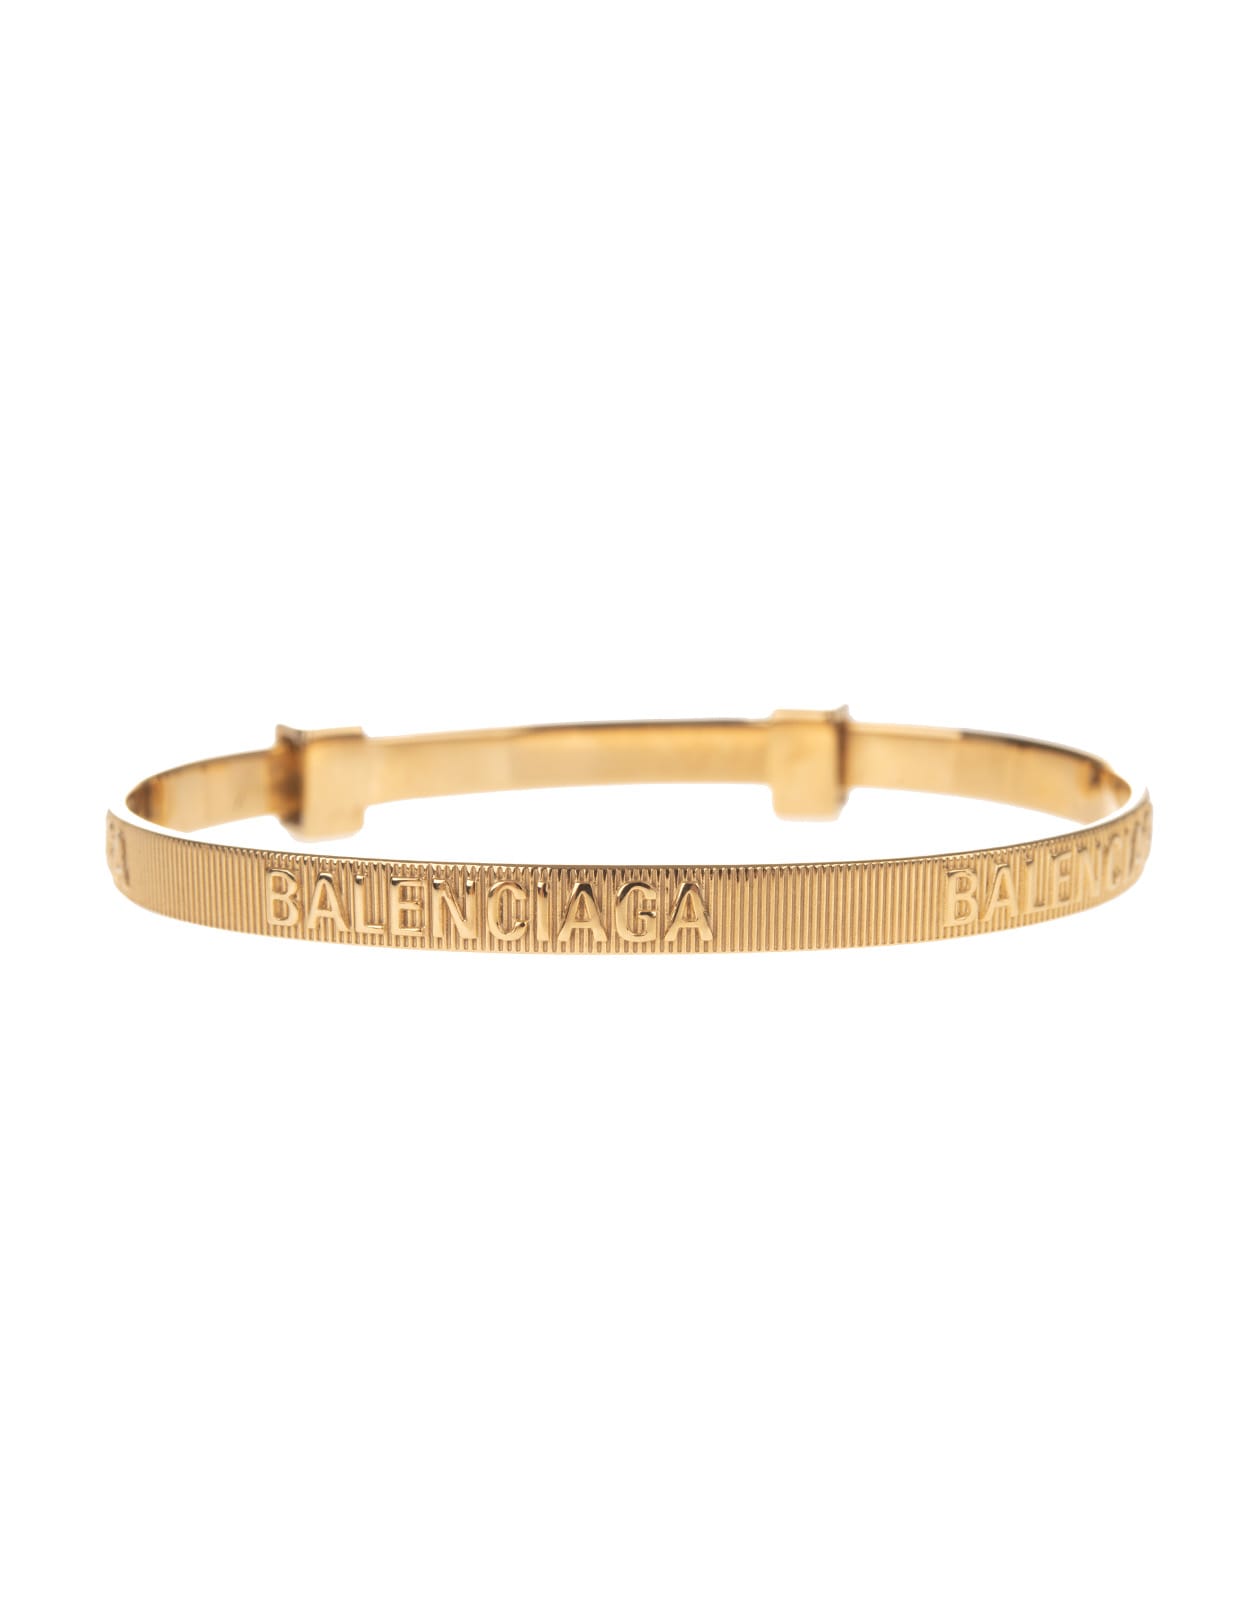 Balenciaga Woman Force Striped Bracelet In Gold Vermeil In Shiny Gold